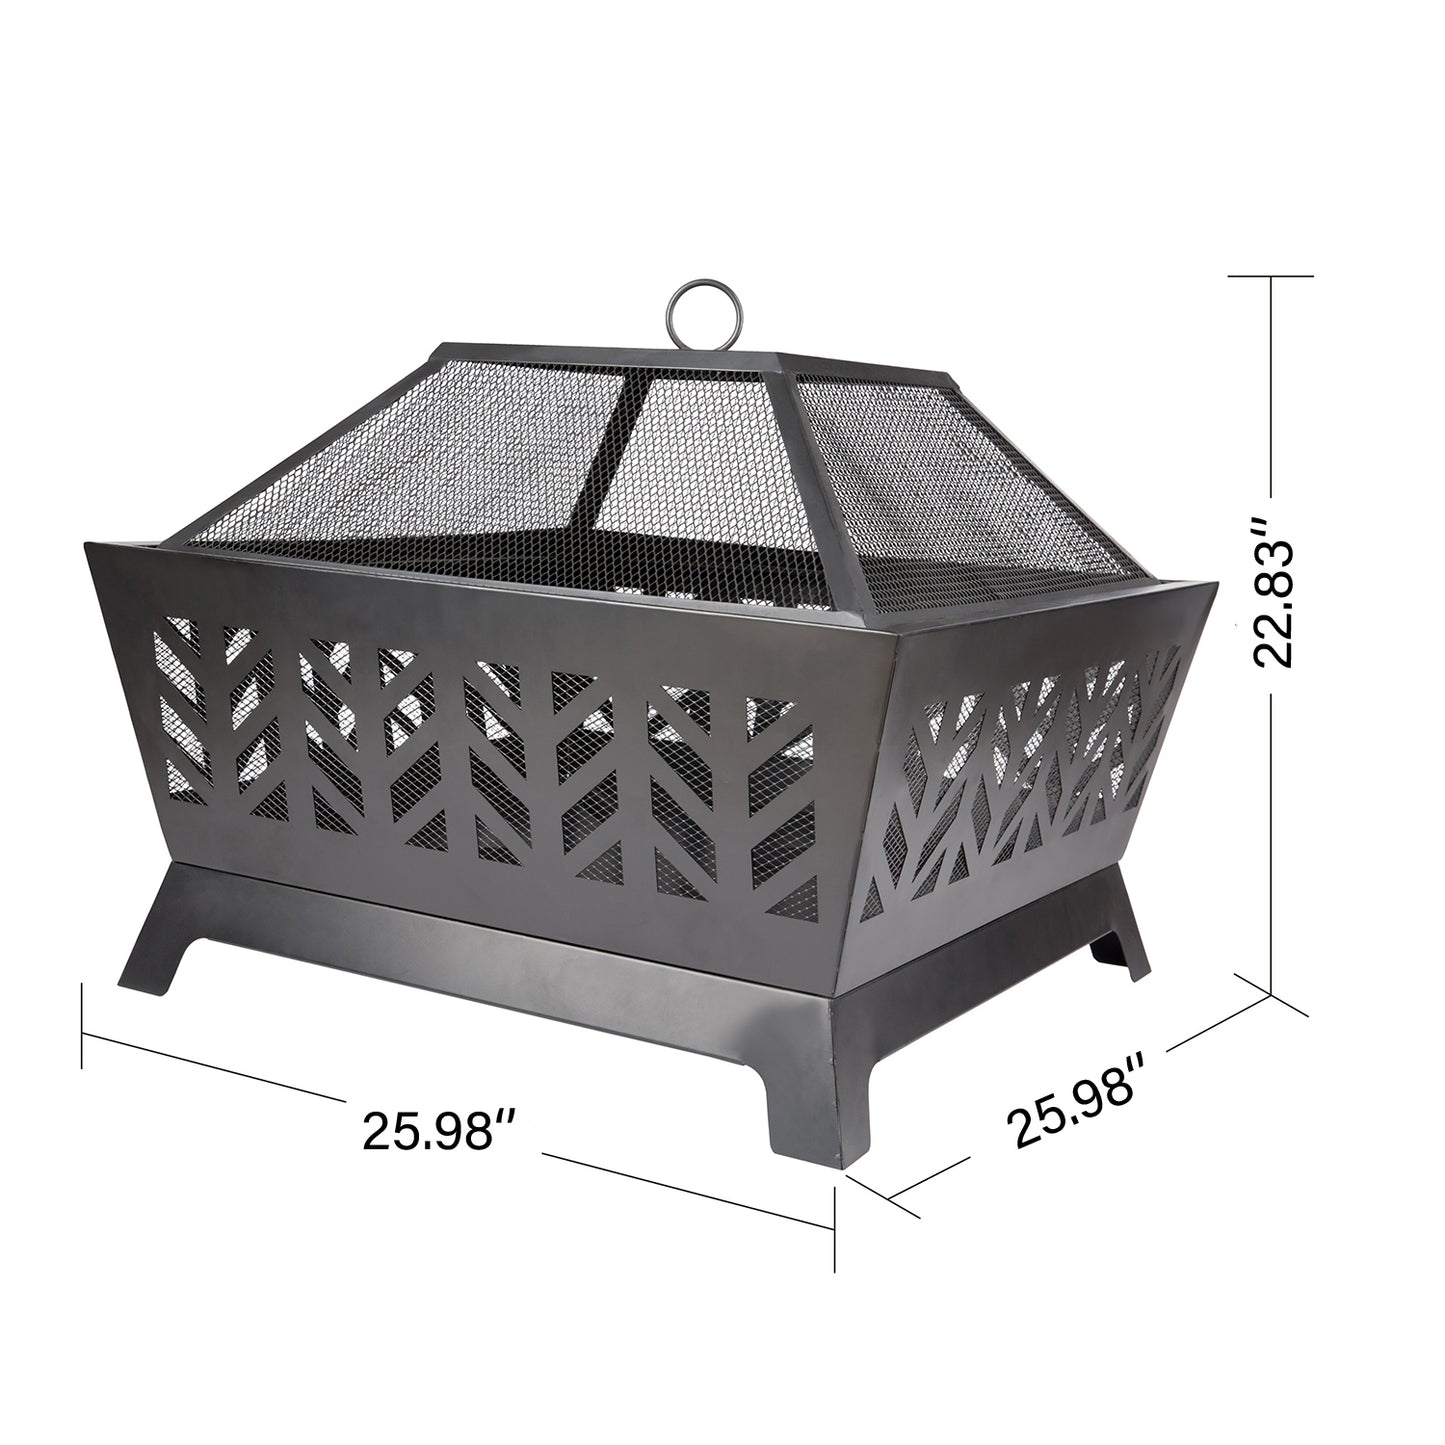 25.98'' Square Iron Outdoor Fire Pit